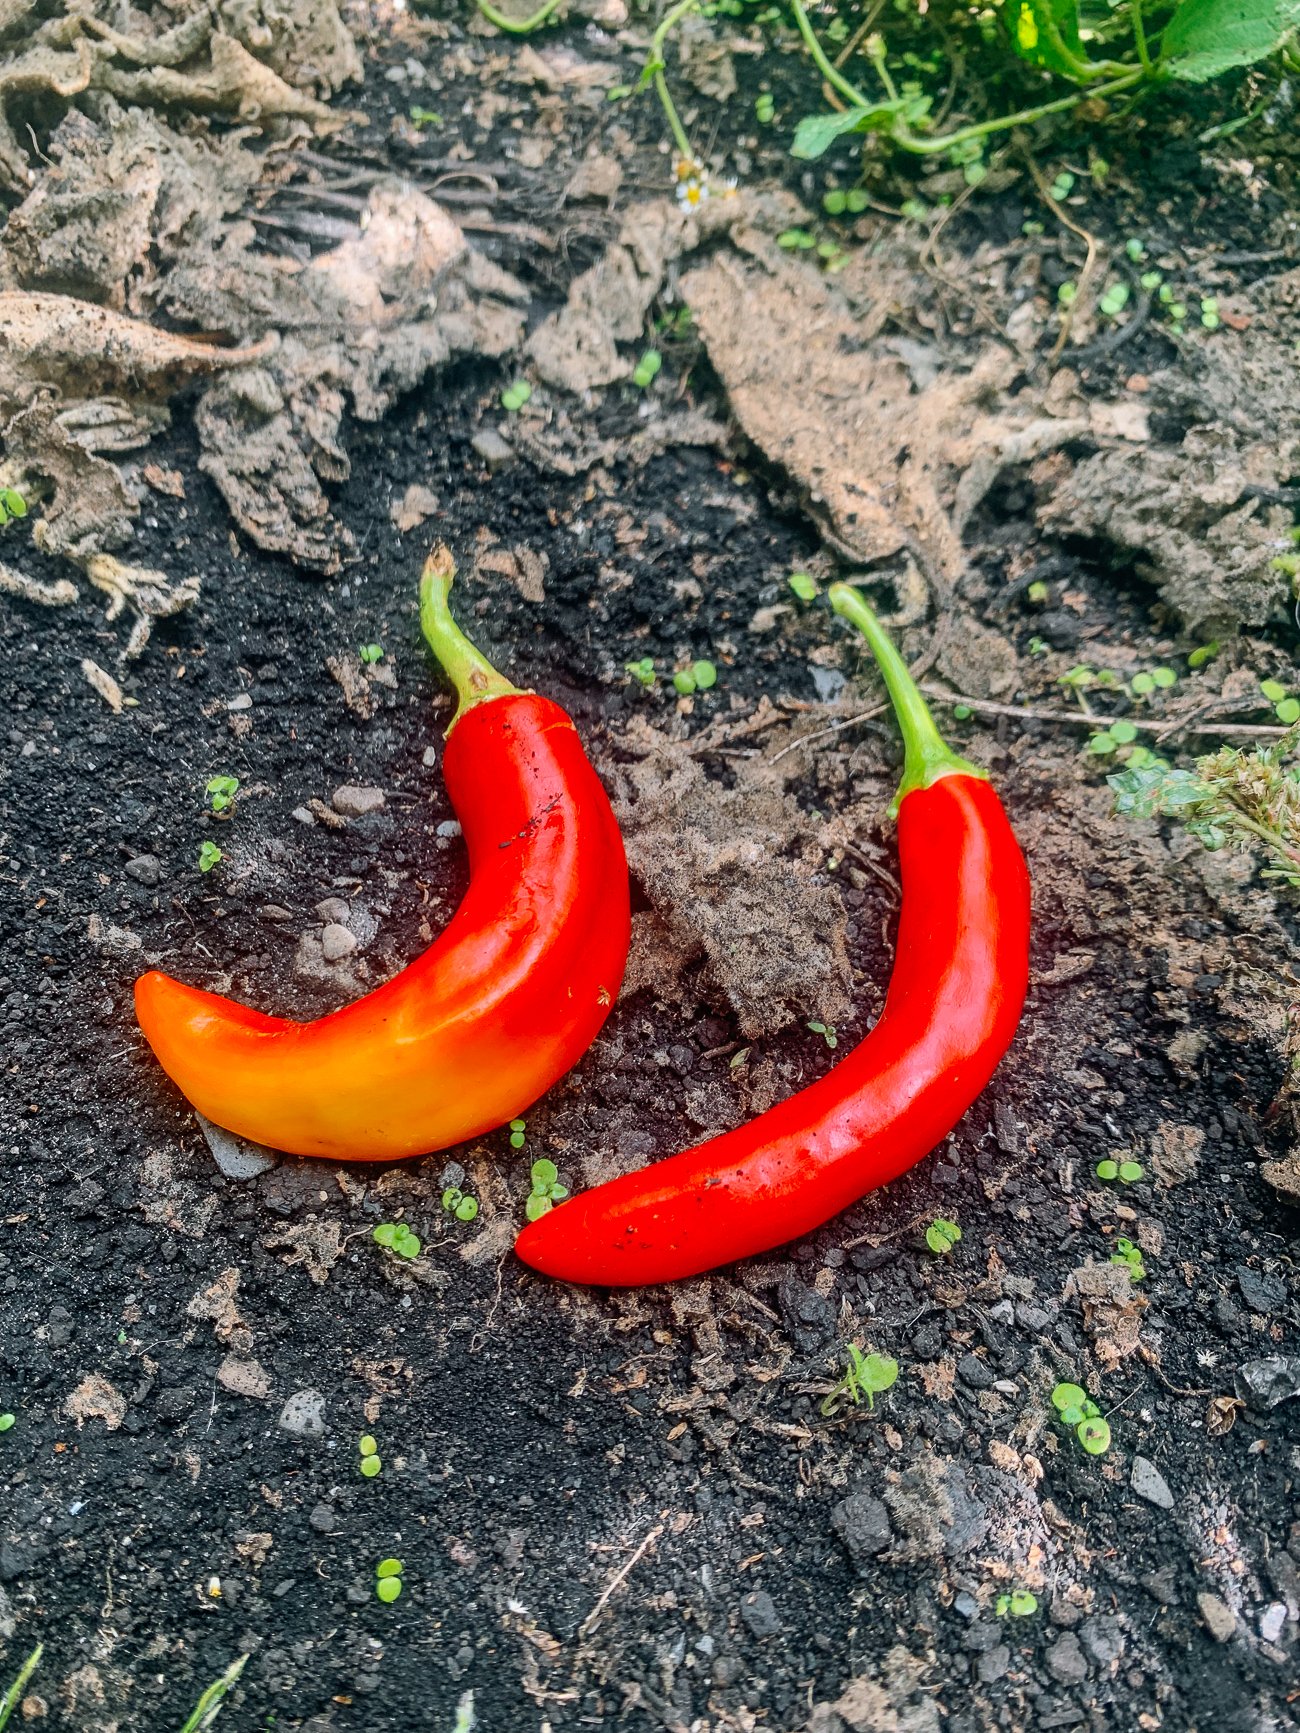 sun scald on left pepper, and a normal pepper on the right